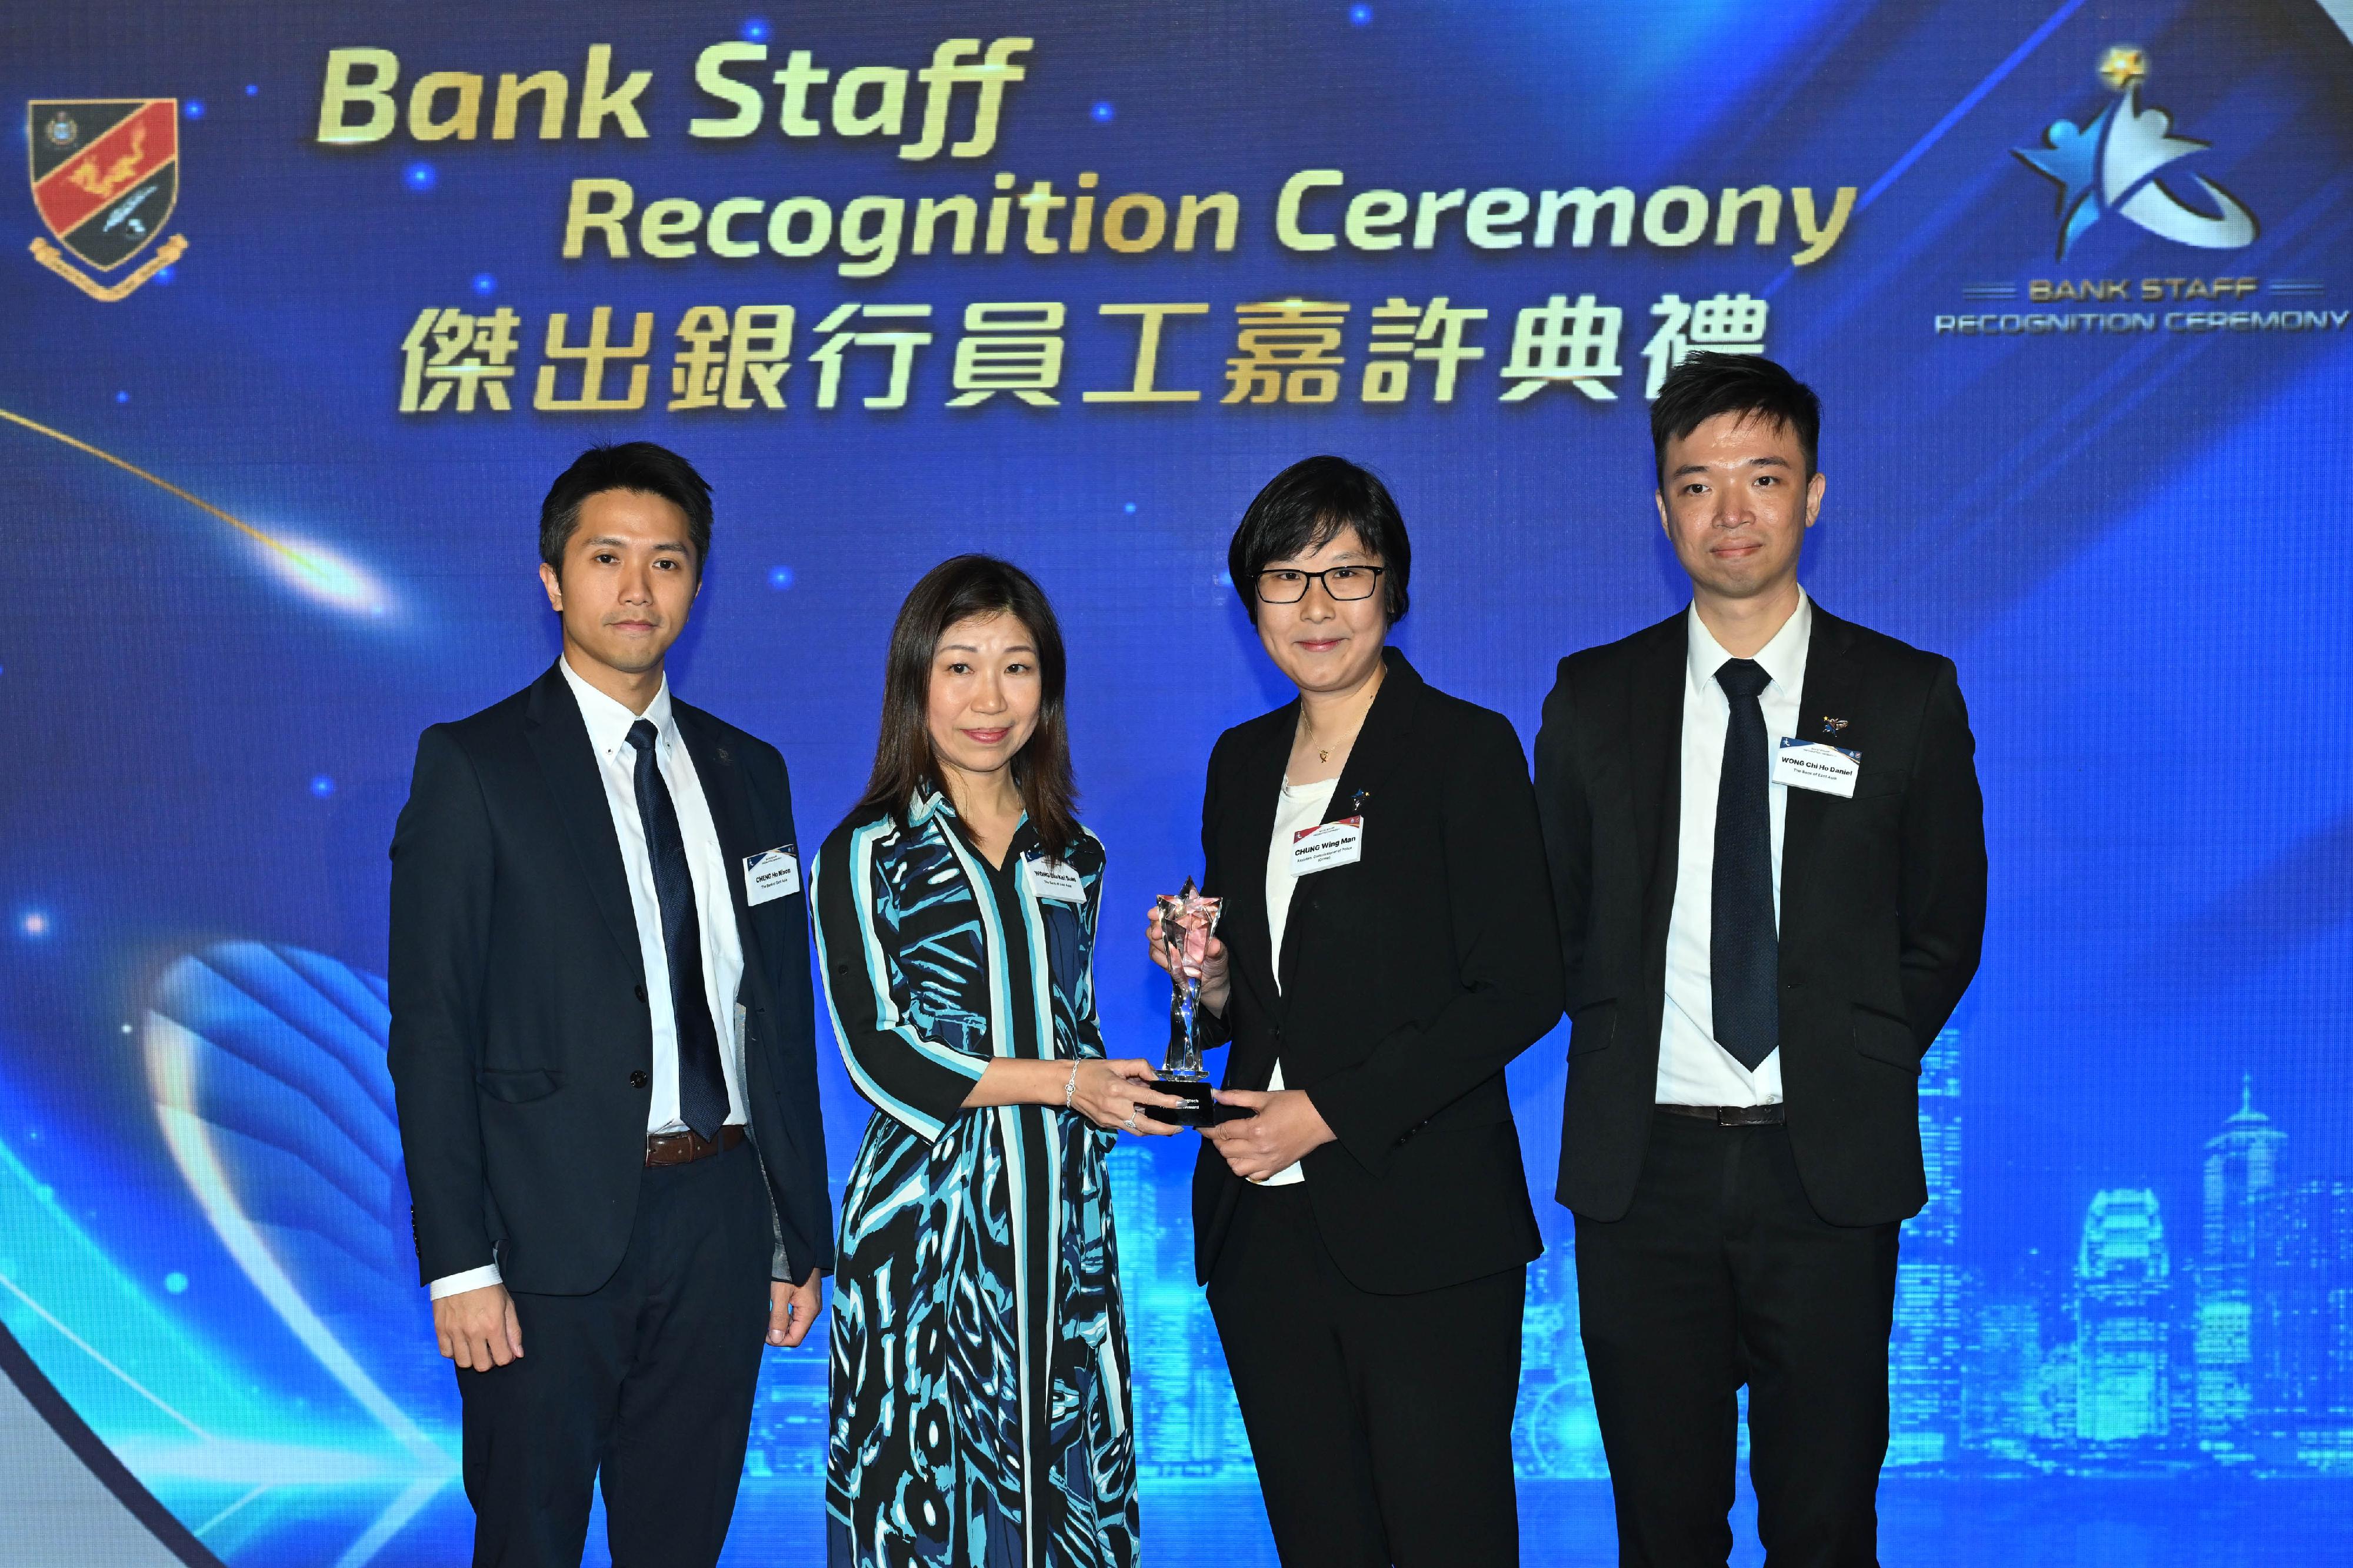 The Bank Staff Recognition Ceremony organised by the Hong Kong Police Force was held today (March 22). Photo shows the Assistant Commissioner of Police (Crime), Ms Chung Wing-man (second right) presenting the Effective Regtech Application Award to the bank representatives.